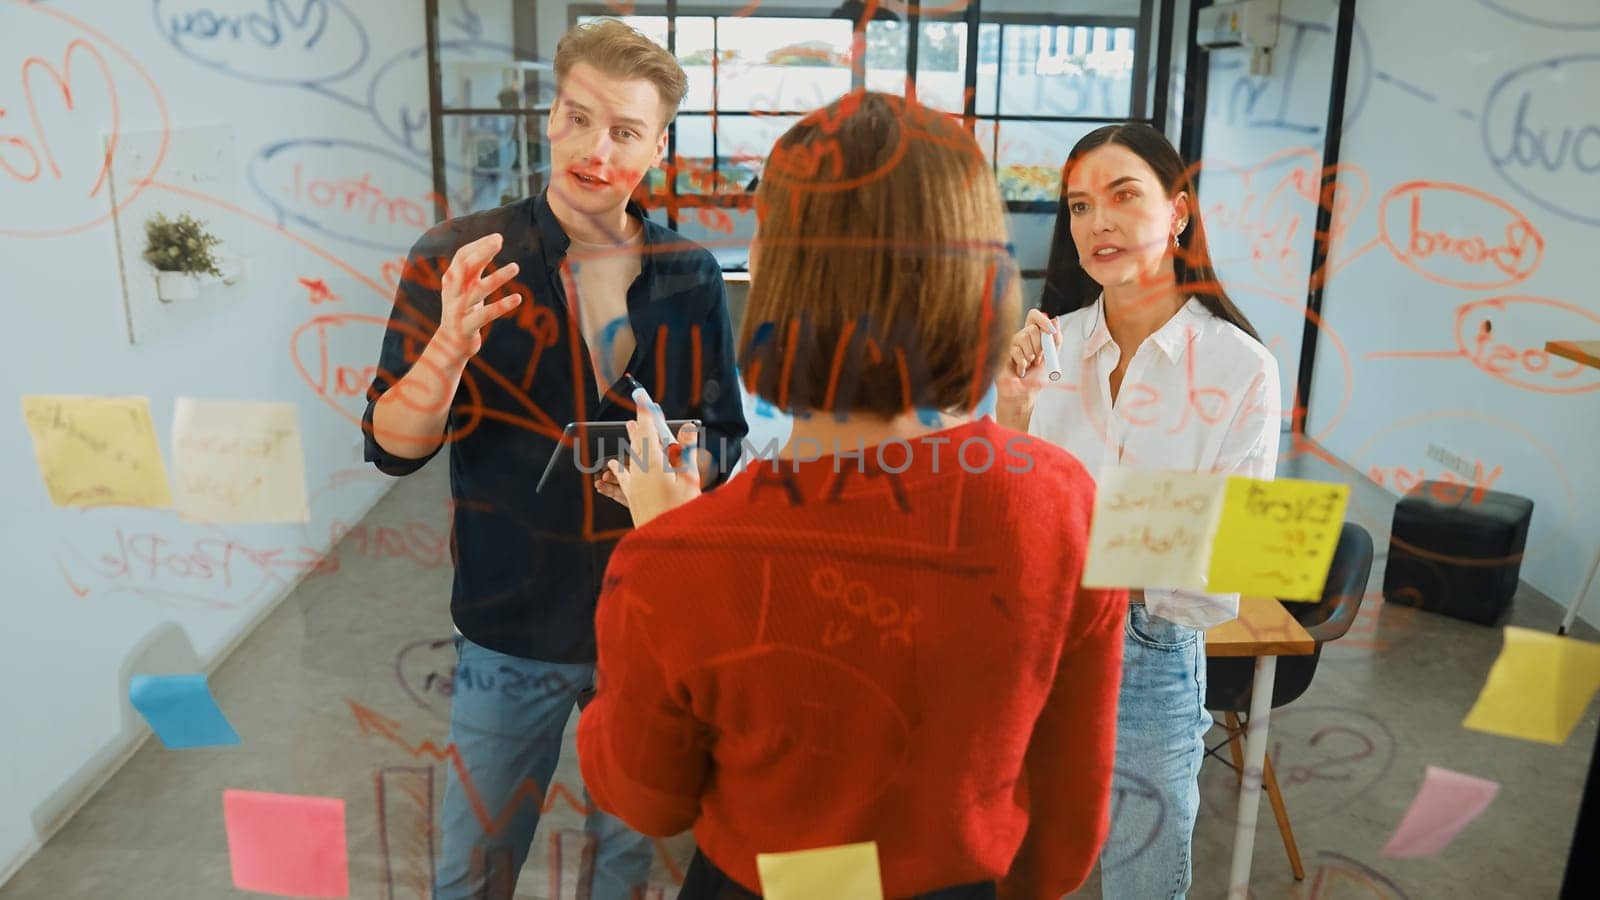 Creative start up team brainstorming marketing idea while cooperative caucasian businesswoman presents creative solution in front of glass board at business meeting. Working together. Immaculate.